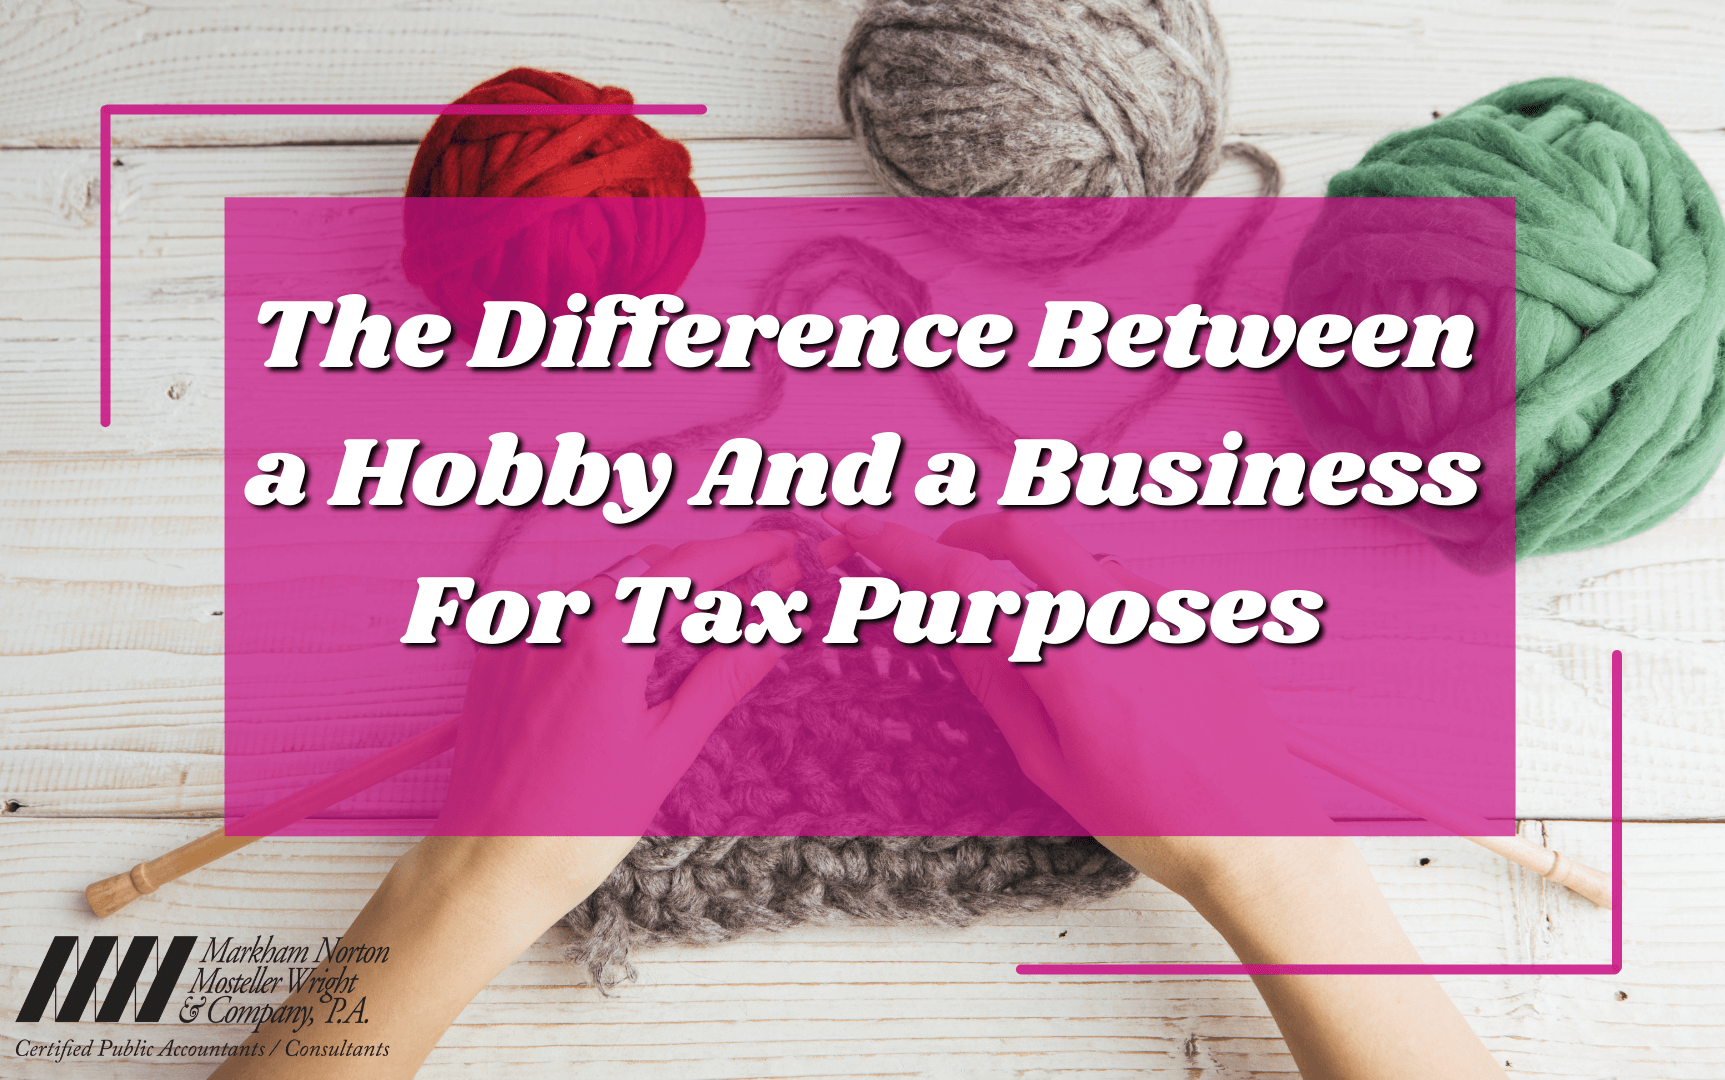 The difference between a hobby and a business